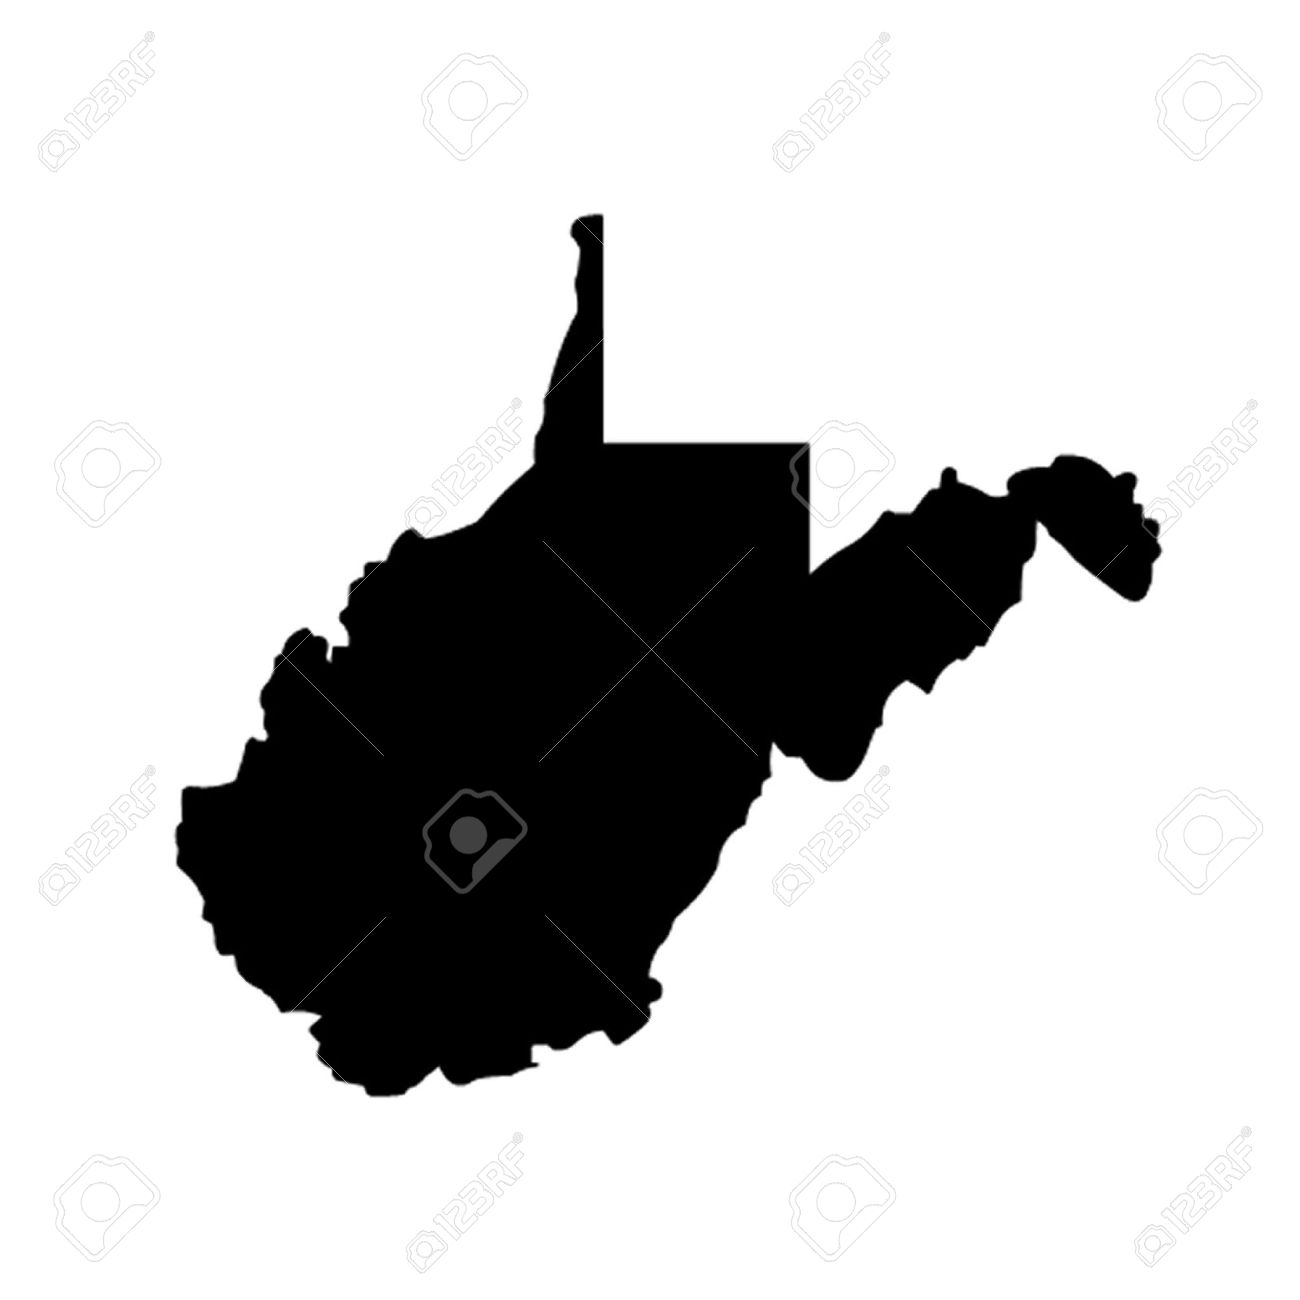 West Virginia clipart #16, Download drawings